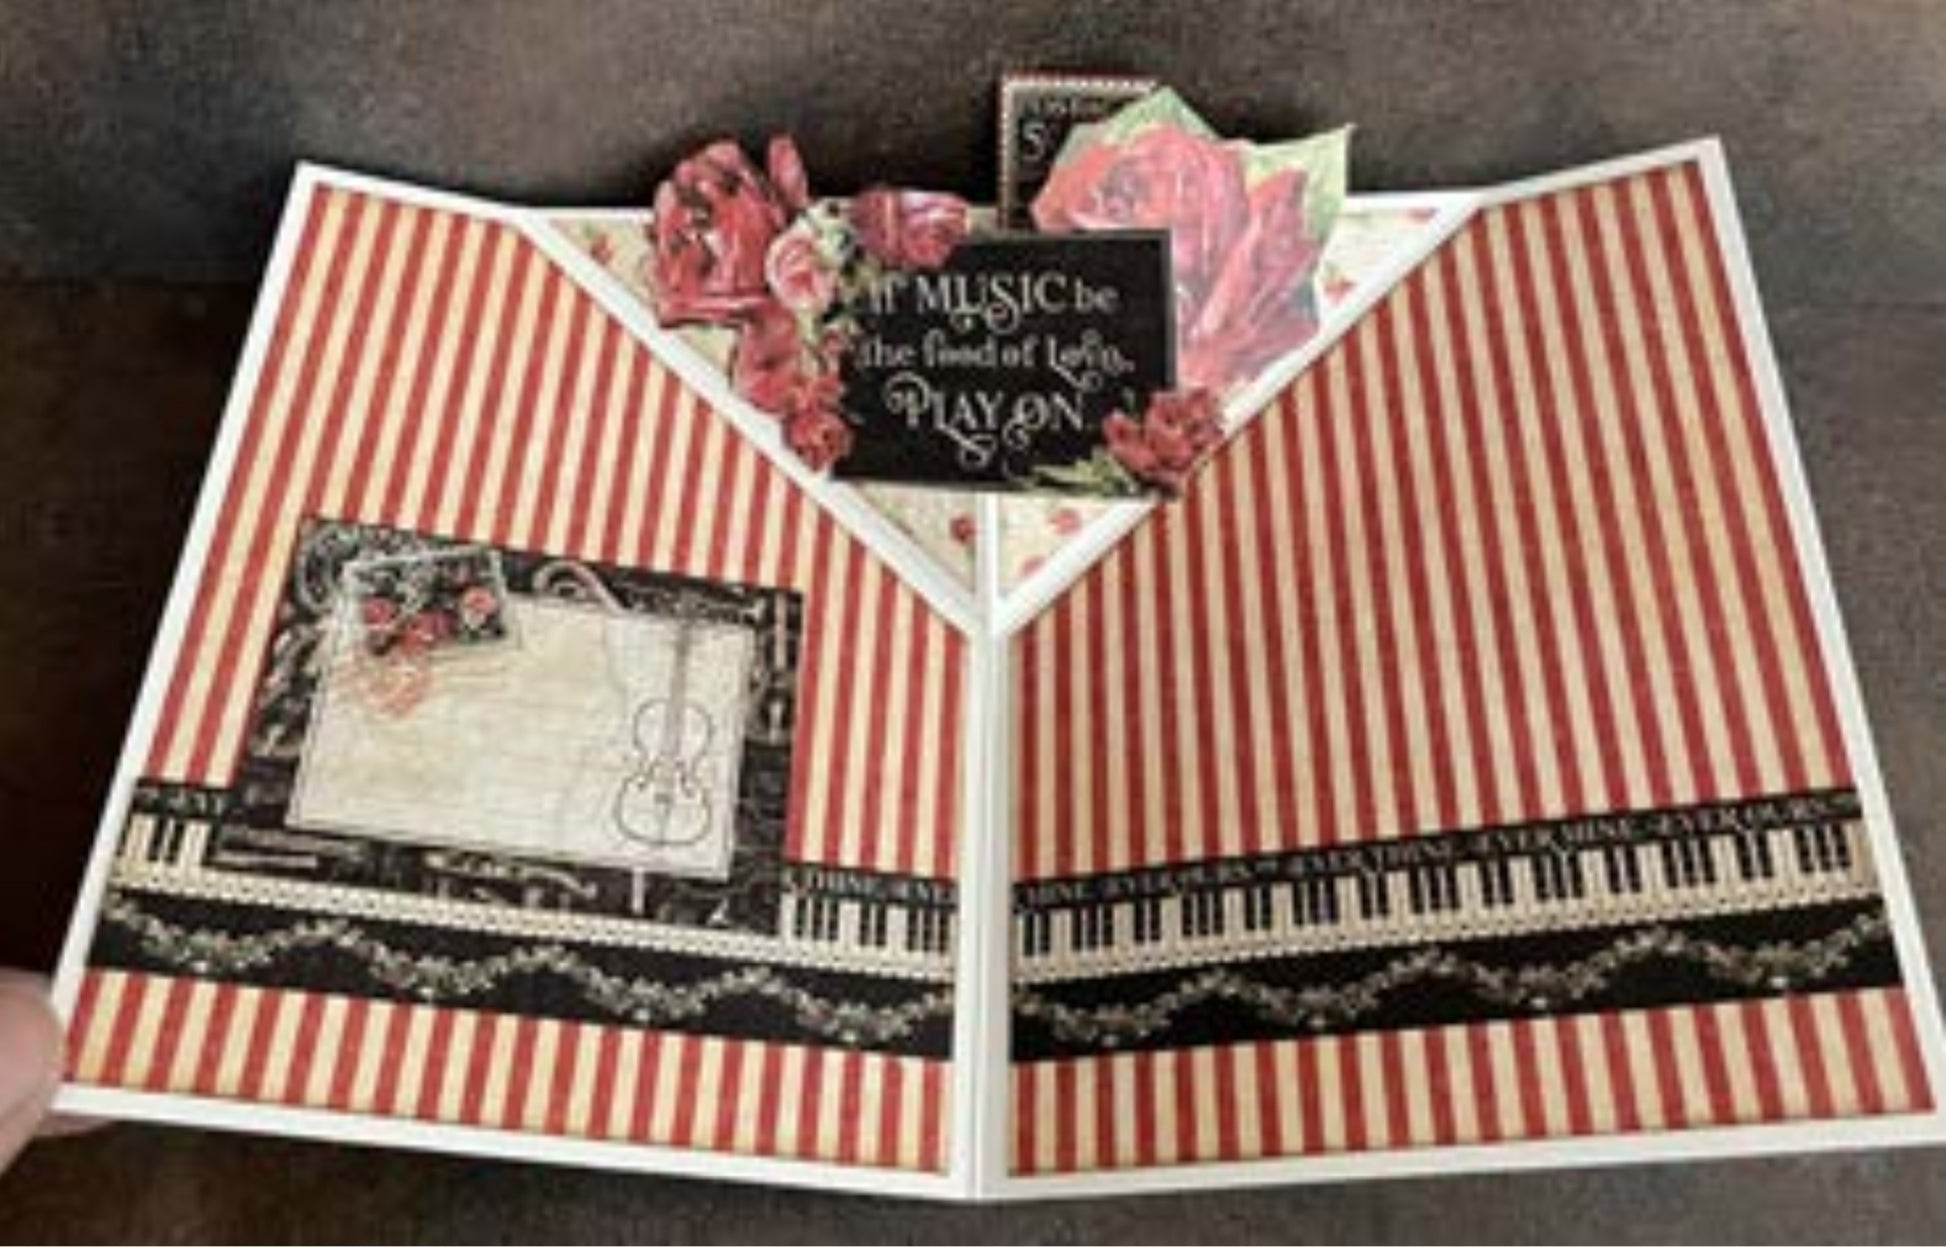 GRAPHIC 45 Princess 12x12 Paper: Pretty in Pink - Scrapbook Generation